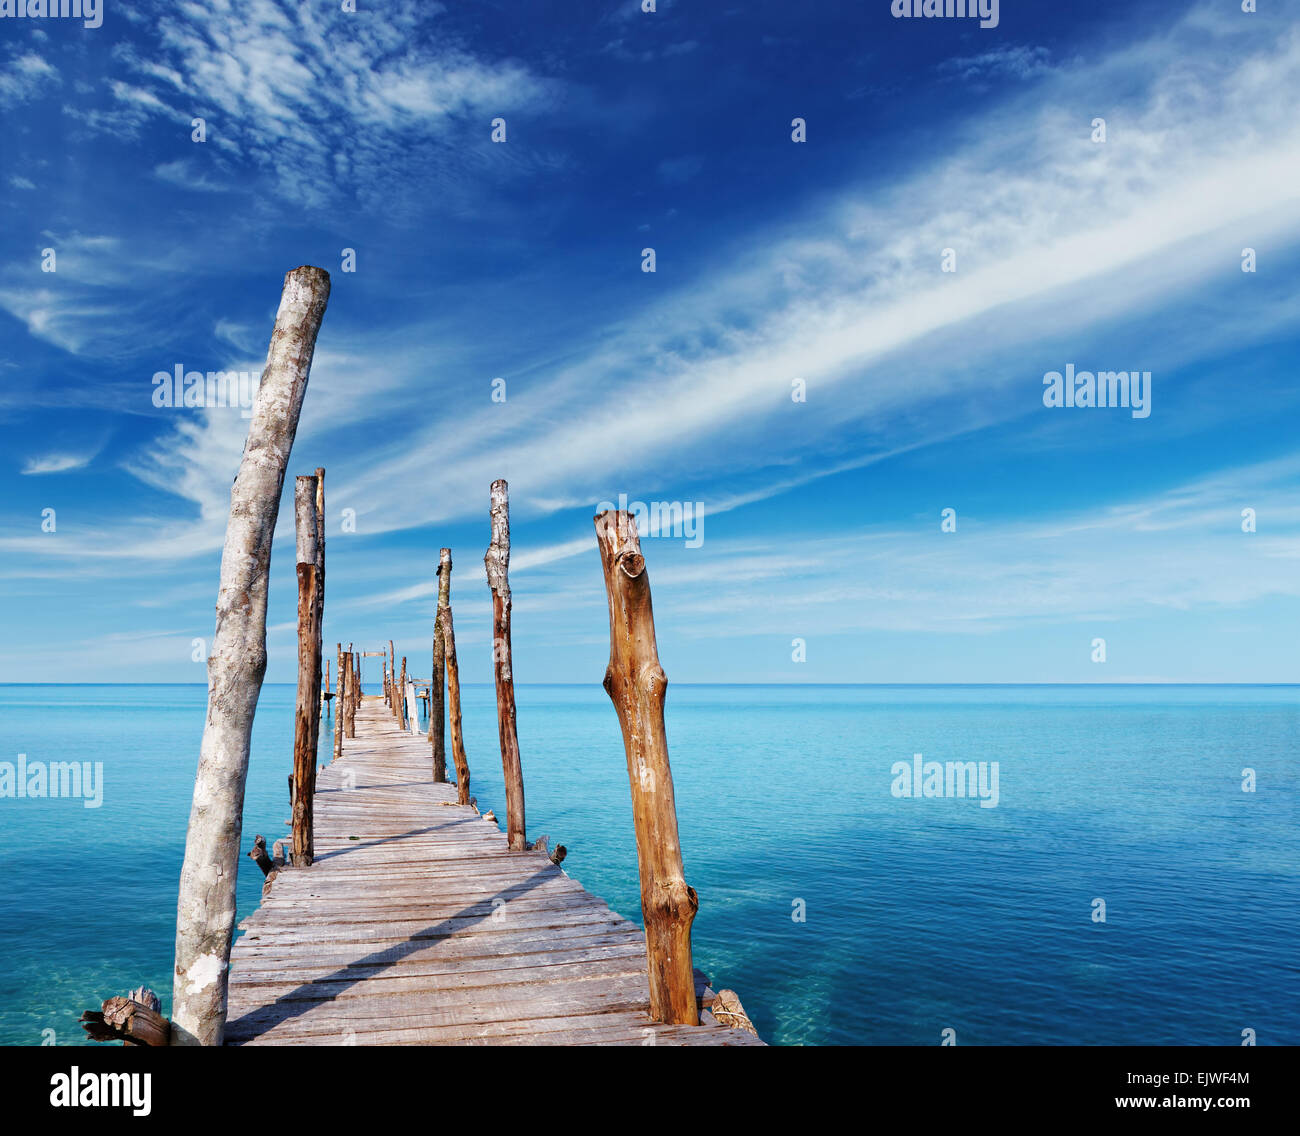 Wooden pier on a tropical island, sea and blue sky, Thailand Stock Photo